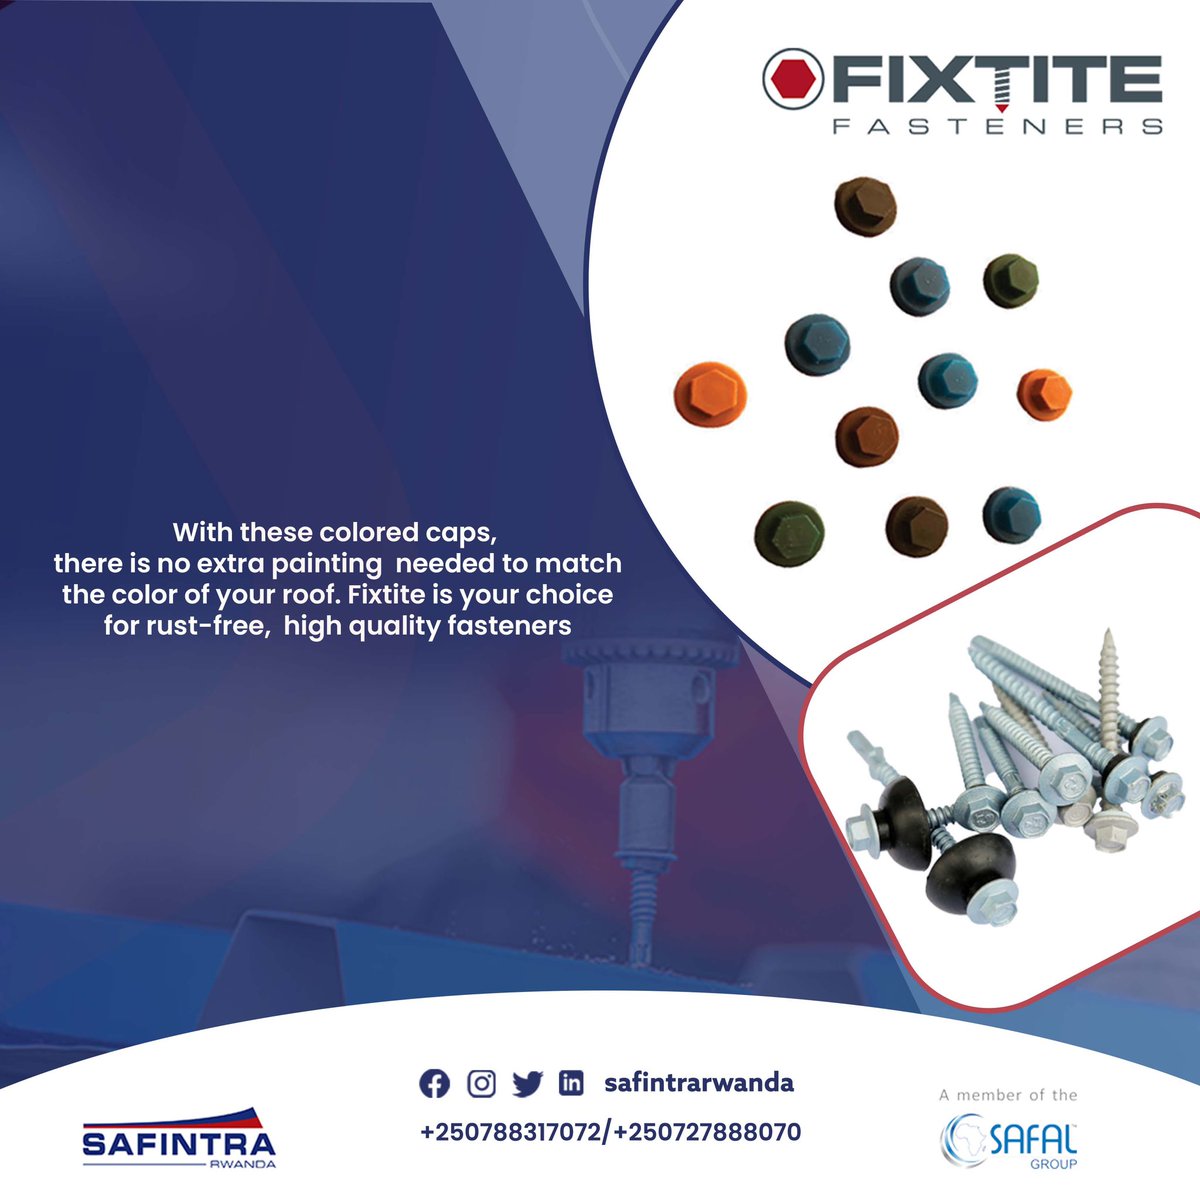 Fixtite is the most durable fasterner available in the market. 

#Safintrarwanda #Buildingsolution #Memberofsafalgroup #Trustedpartener #Constructionmaterial